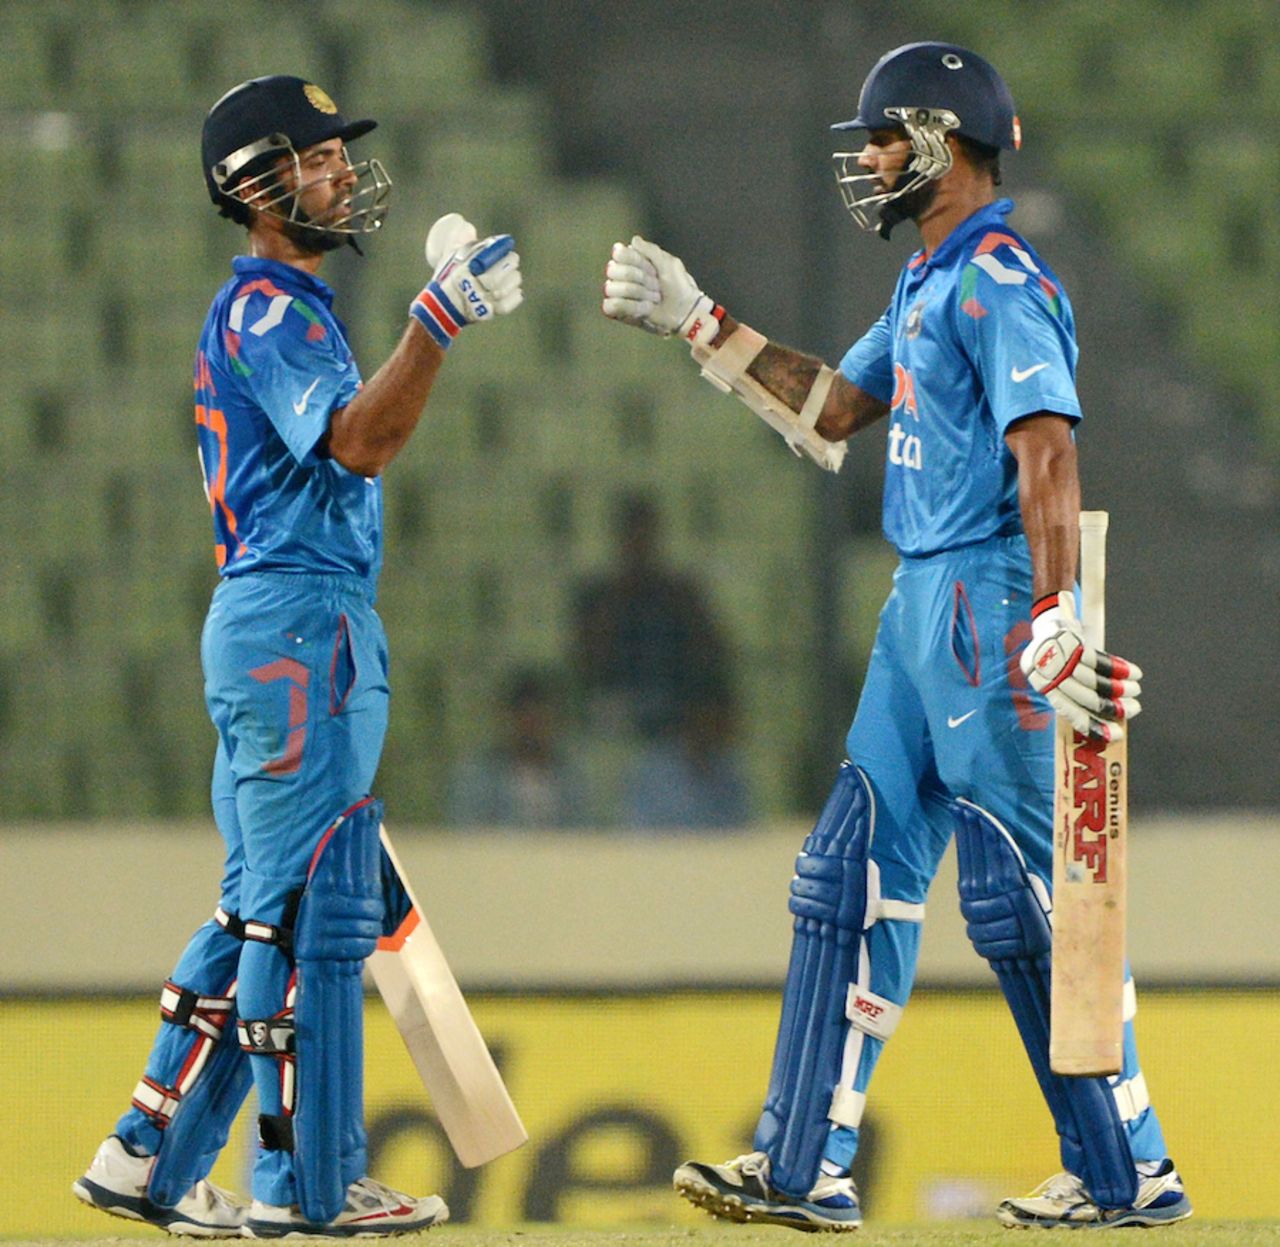 Ajinkya Rahane and Shikhar Dhawan added 121 runs for the first wicket, Afghanistan v India, Asia Cup, Mirpur, March 5, 2014